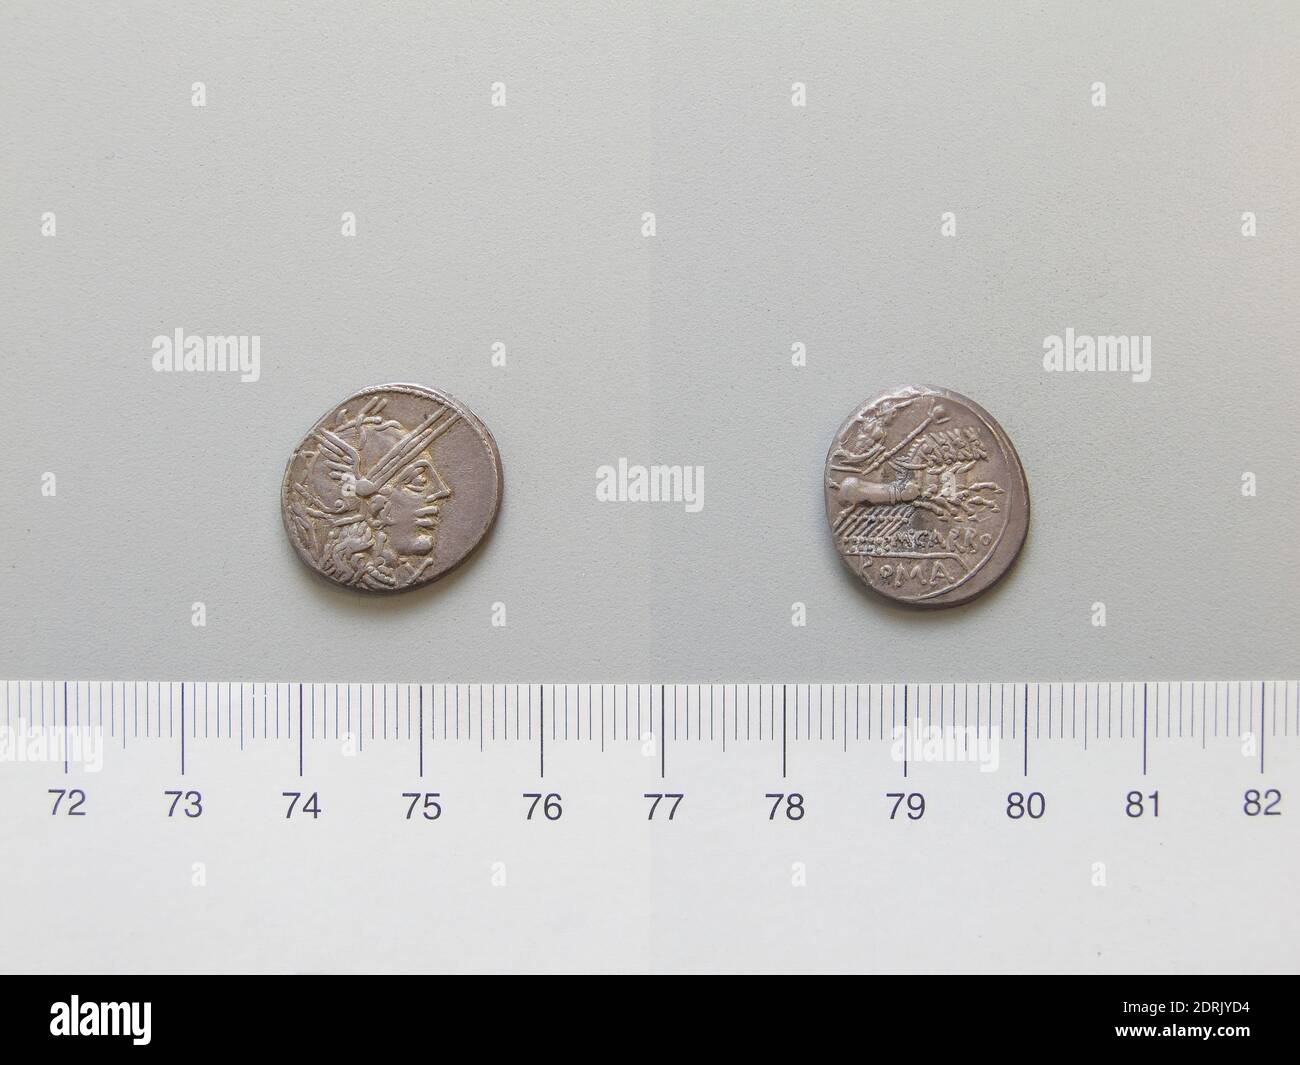 Mint: Rome, Magistrate: M. CARBO, Denarius from Rome, 122 B.C., Silver, 3.97 g, 5:00, 19 mm, Made in Rome, Italy, Roman, 2nd century B.C., Numismatics Stock Photo